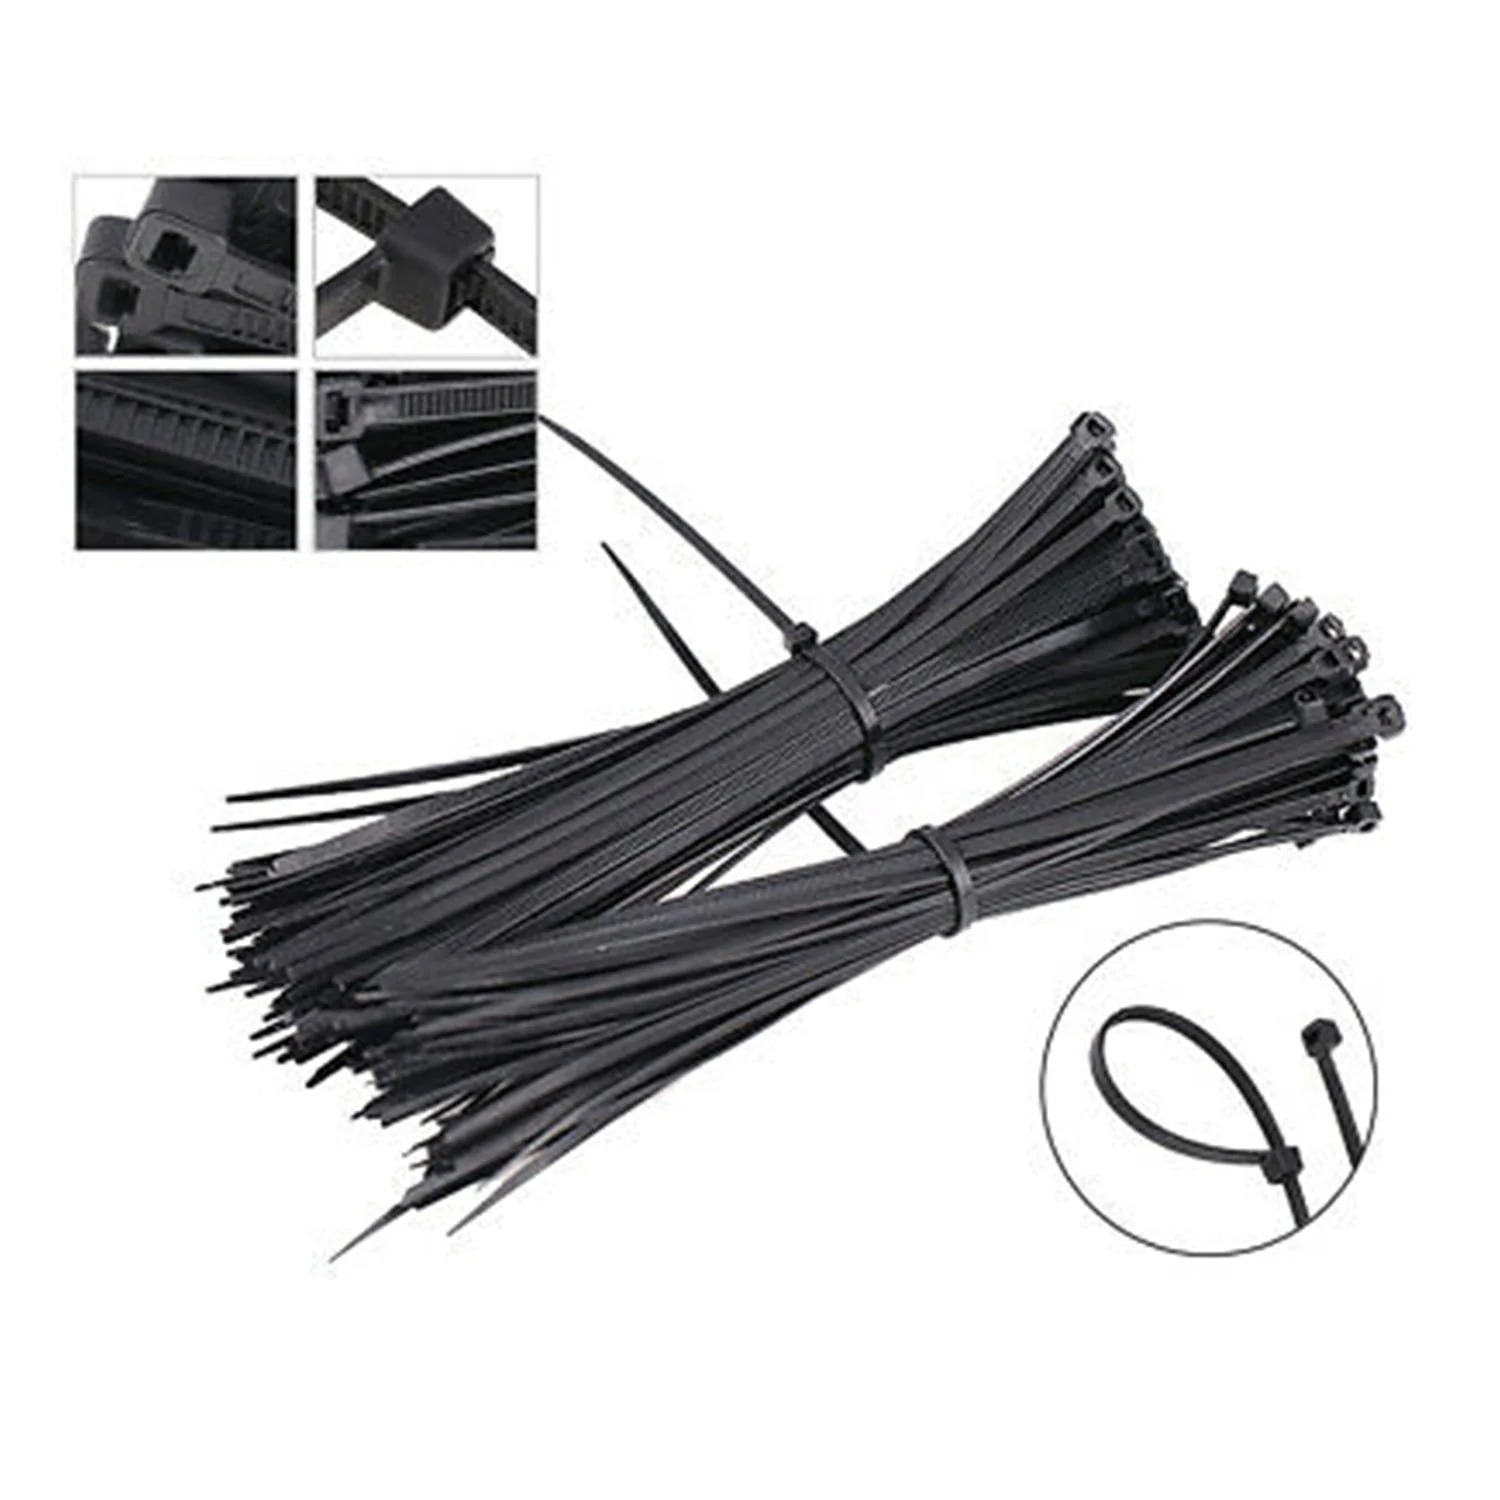 CABLE TIES 6 INCH